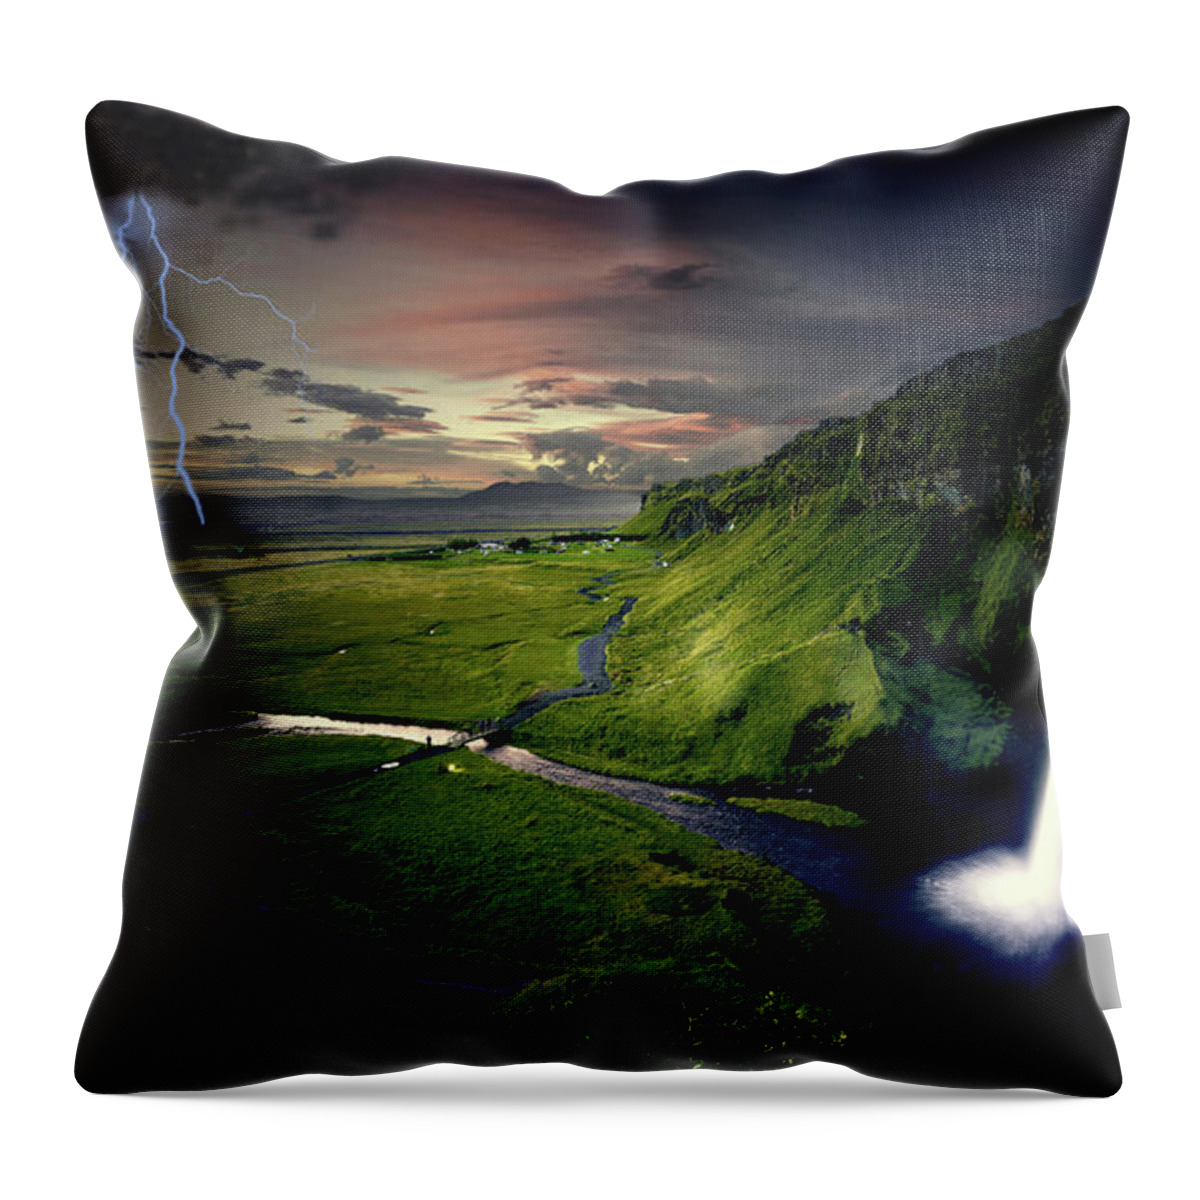 Lightning Throw Pillow featuring the photograph Stormfront by Eva Sawyer